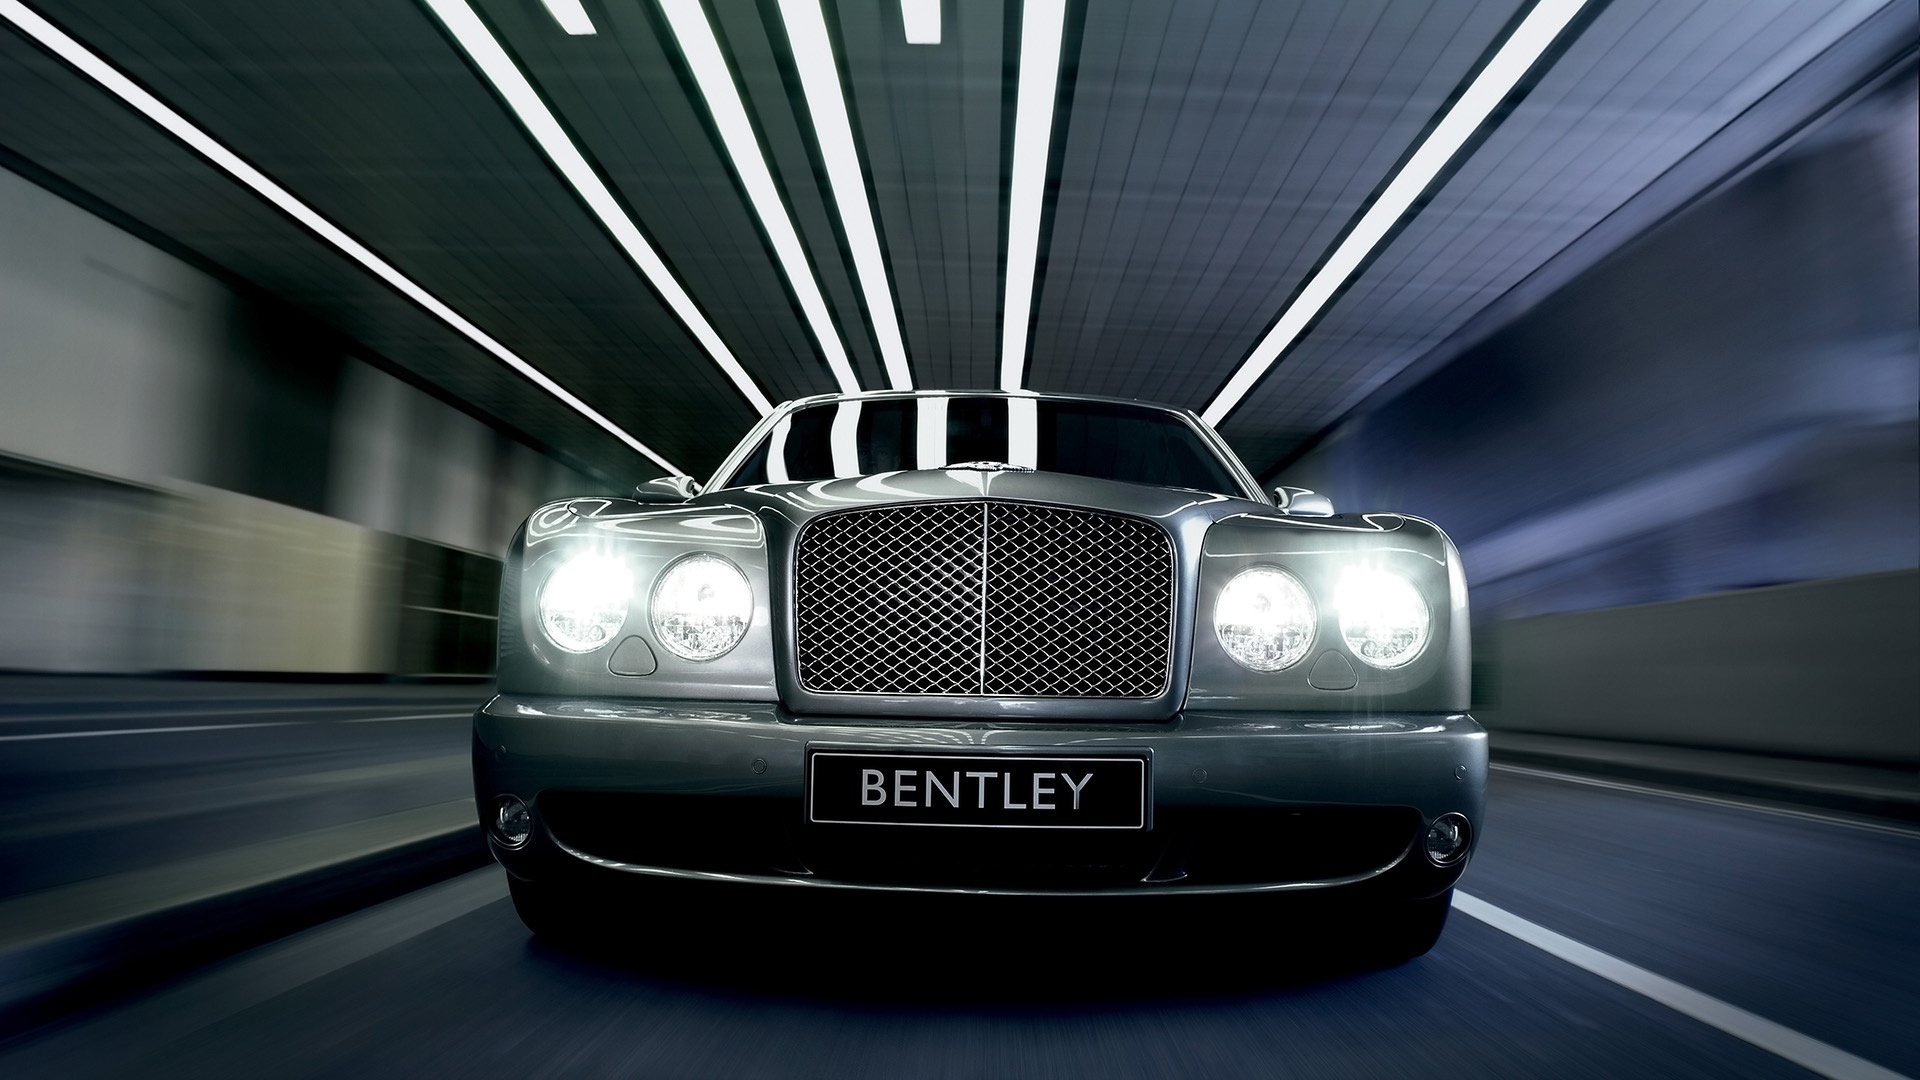 Bentley Arnage Front 2007 for 1920 x 1080 HDTV 1080p resolution